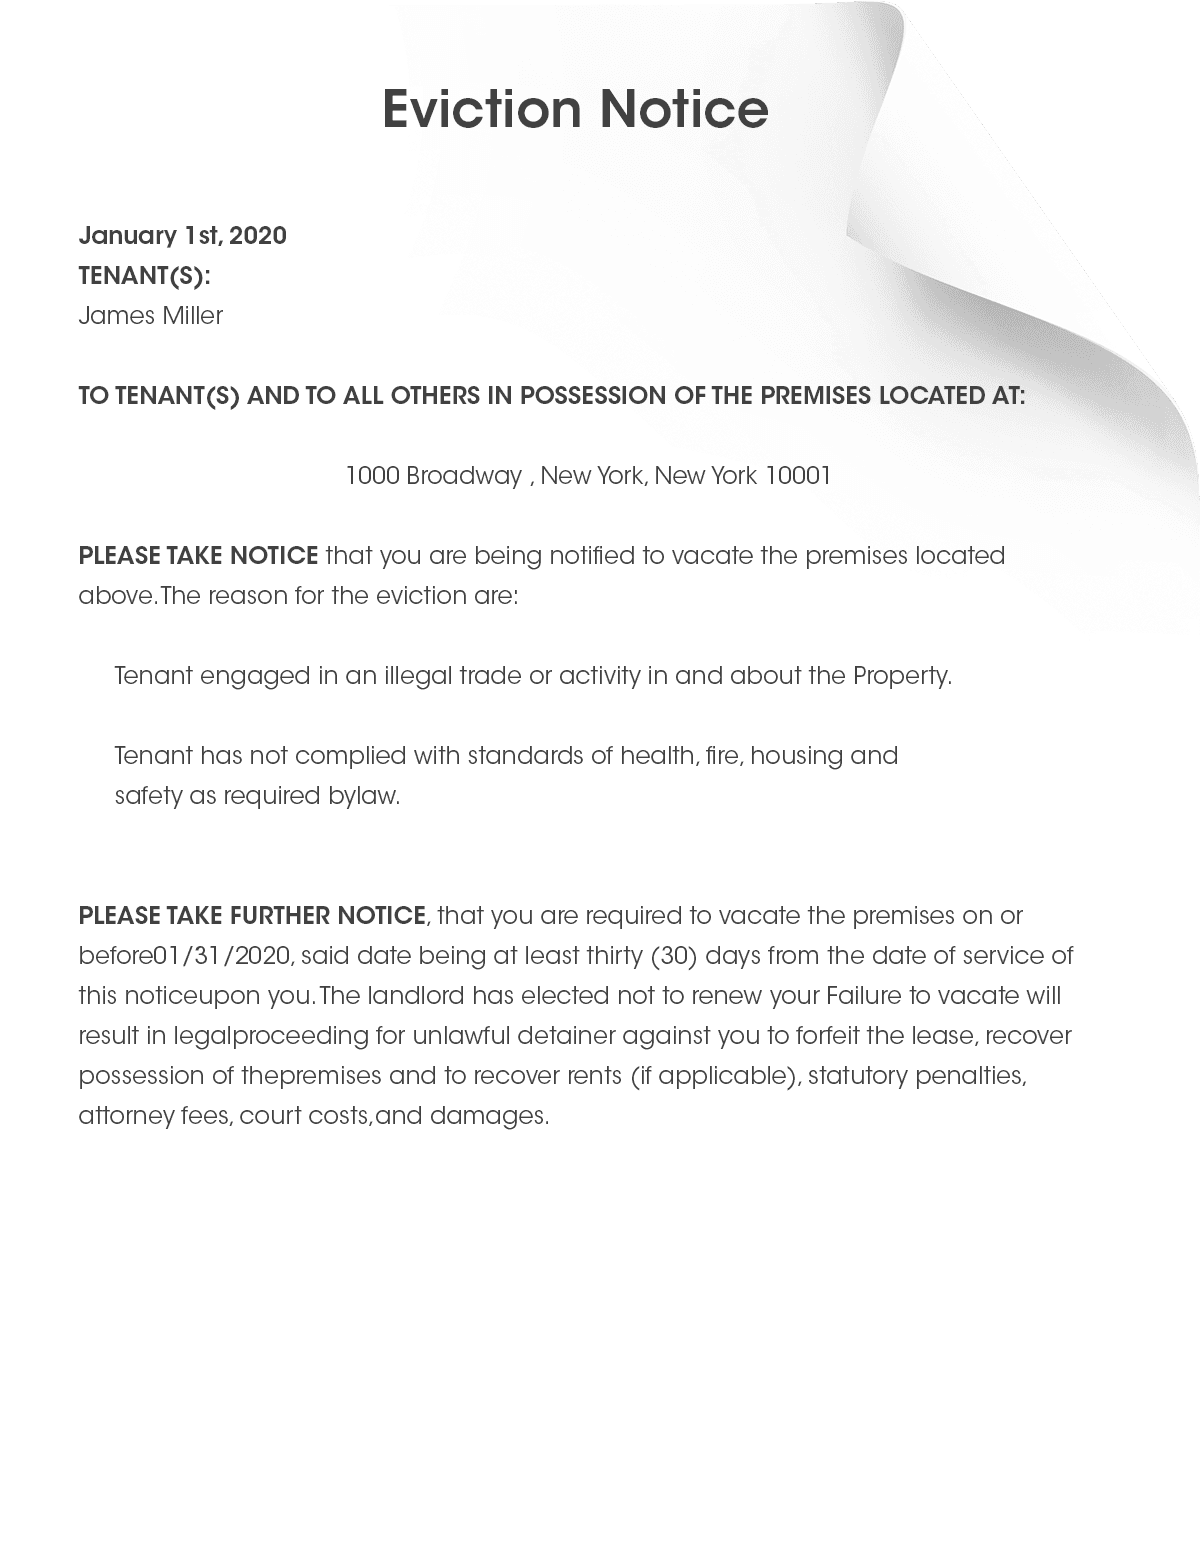 Proper Eviction Notice Letter from s30311.pcdn.co